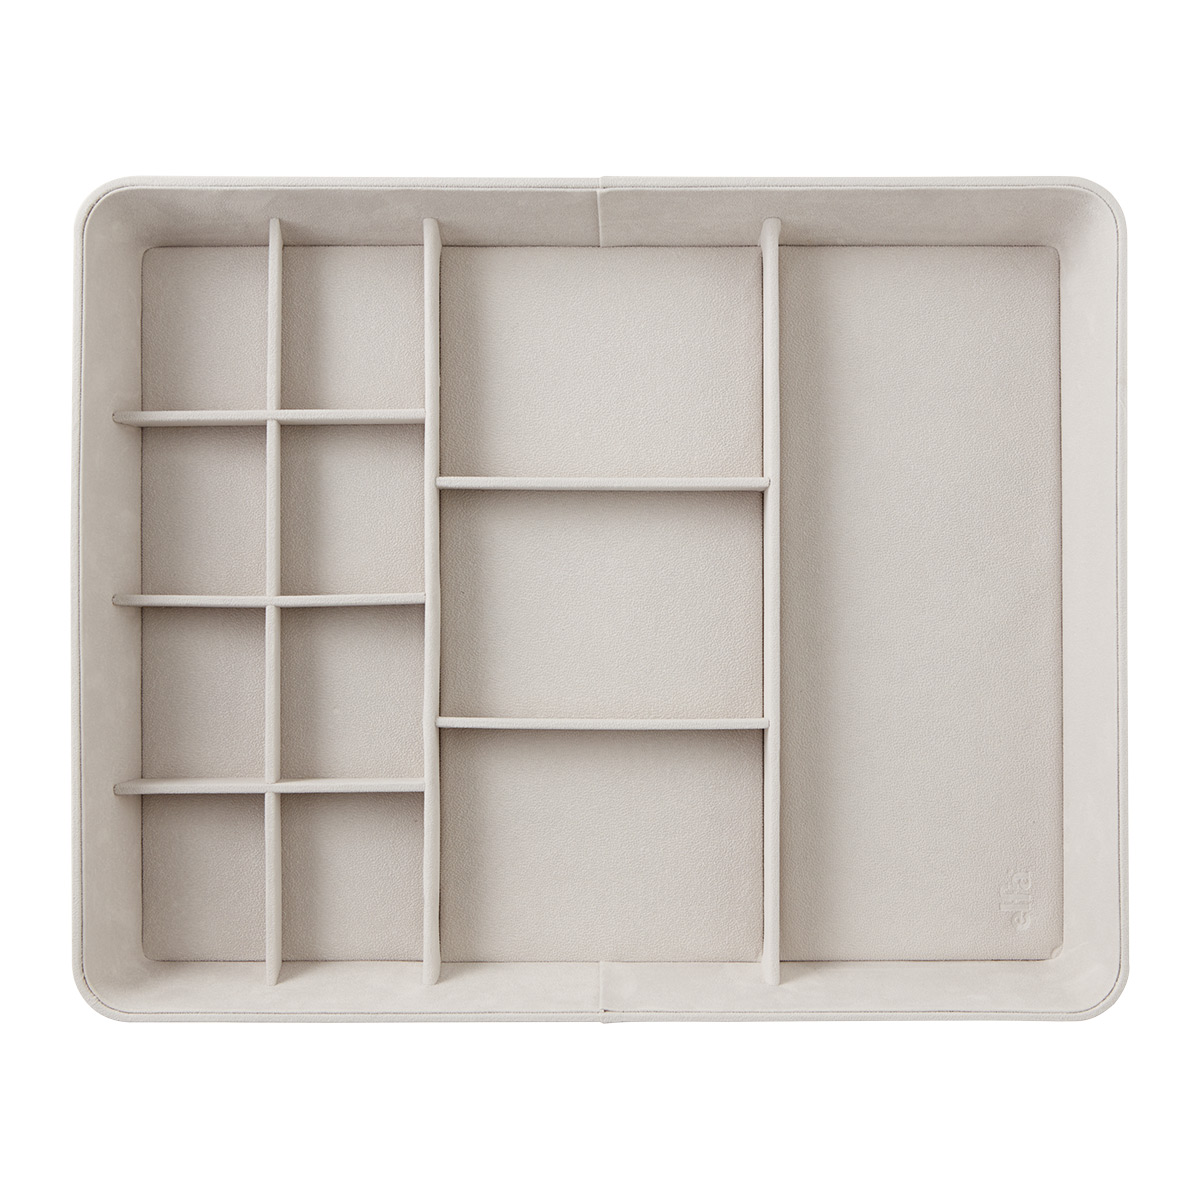 Plastic Trays - Set Of 12 - Primary Colors